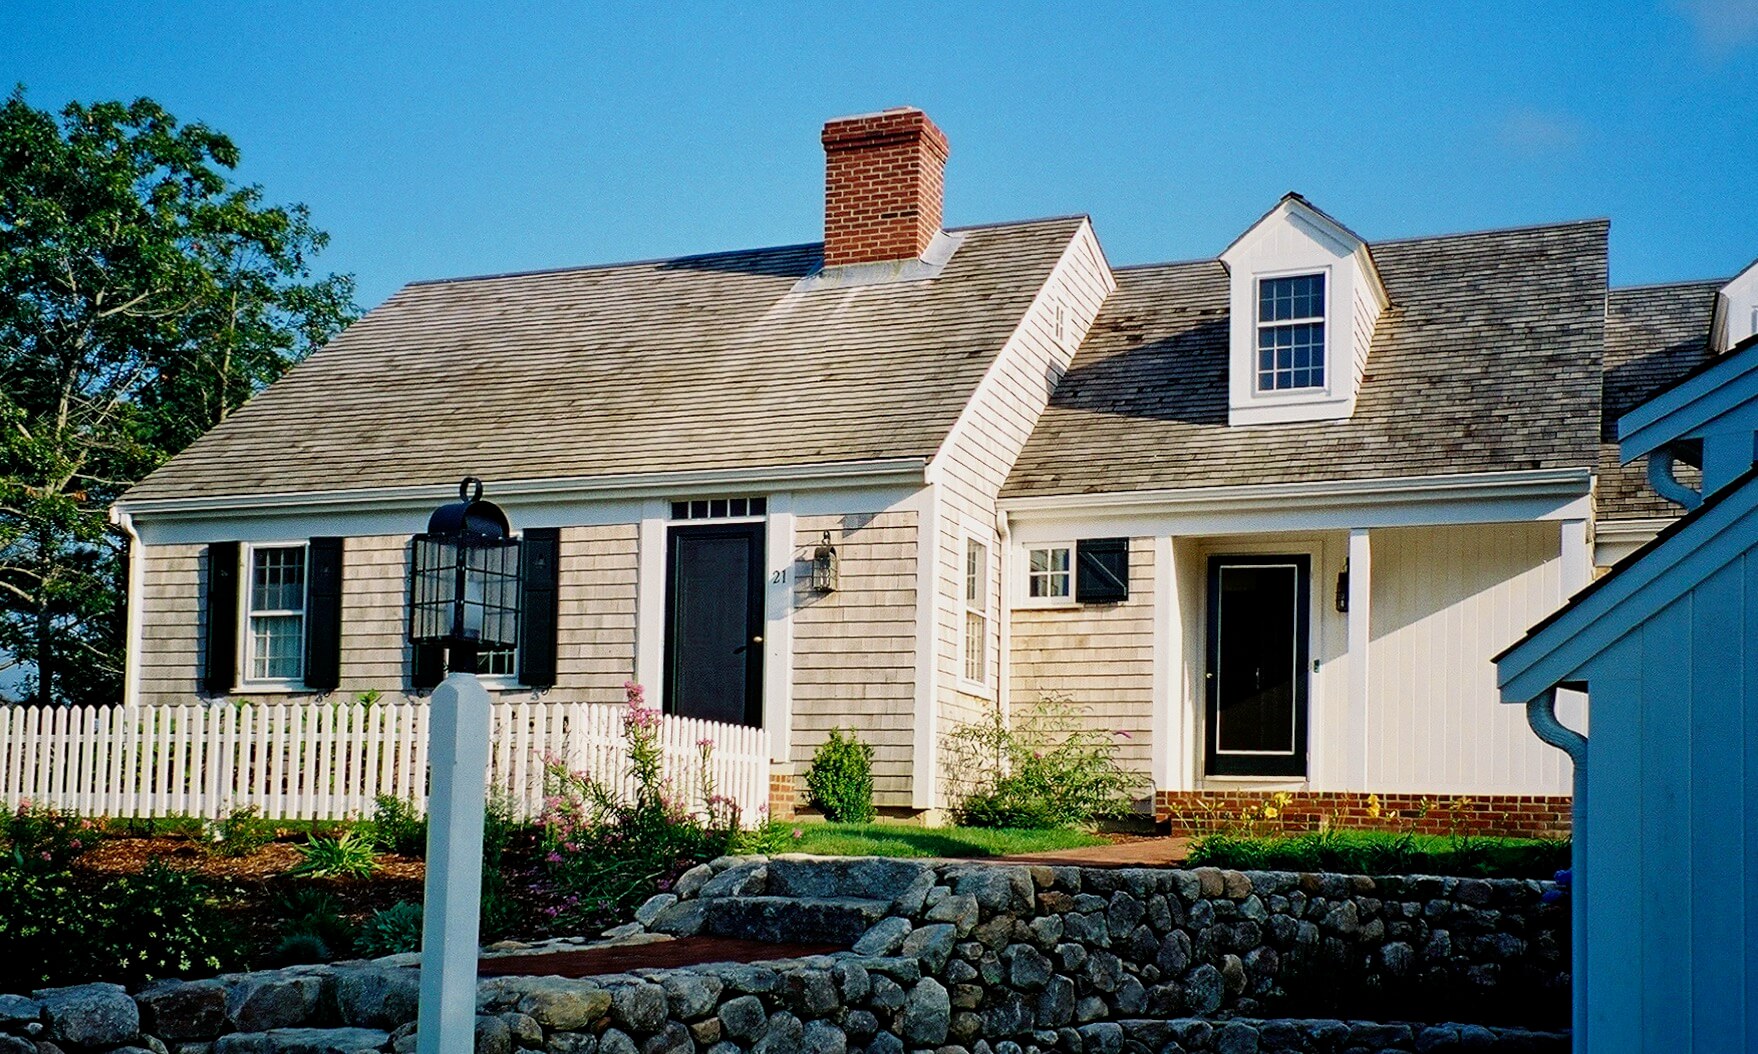 Classic "half Cape" with doghouse dormer and farmer's porch entry. Cape Cod House in Orleans MA.